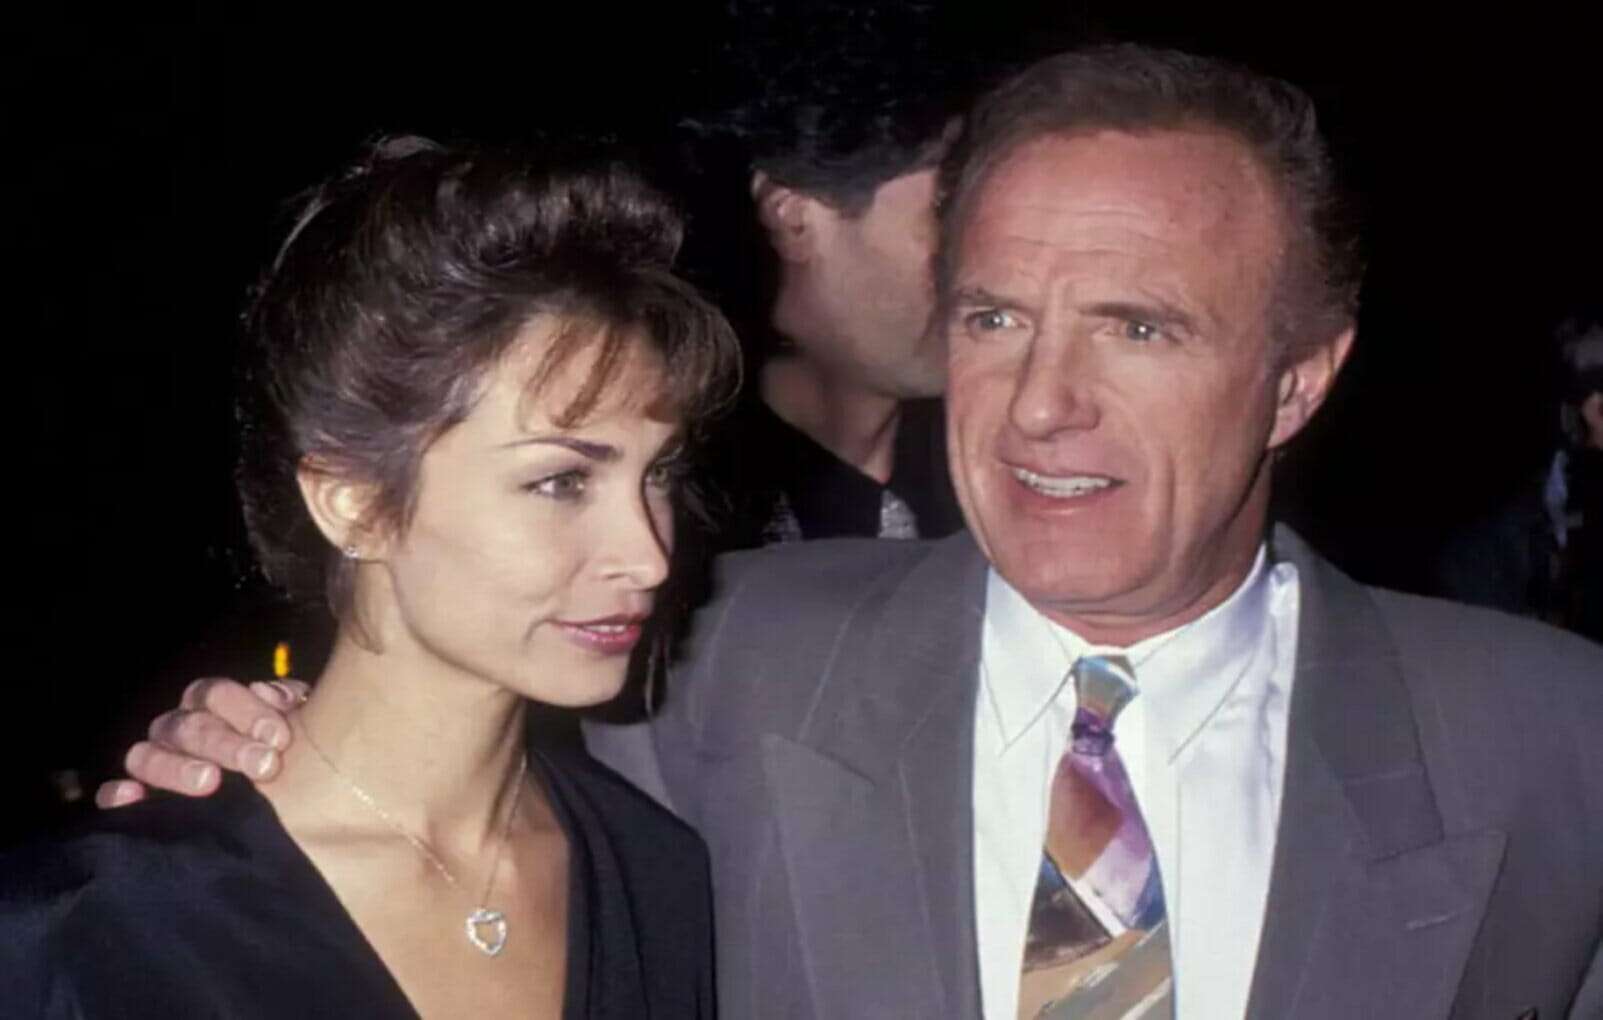 James Caan's Ex-wife Dee Jay Mathis Biography: Age, Movies, Net Worth, Spouse, Instagram, Height, Wikipedia